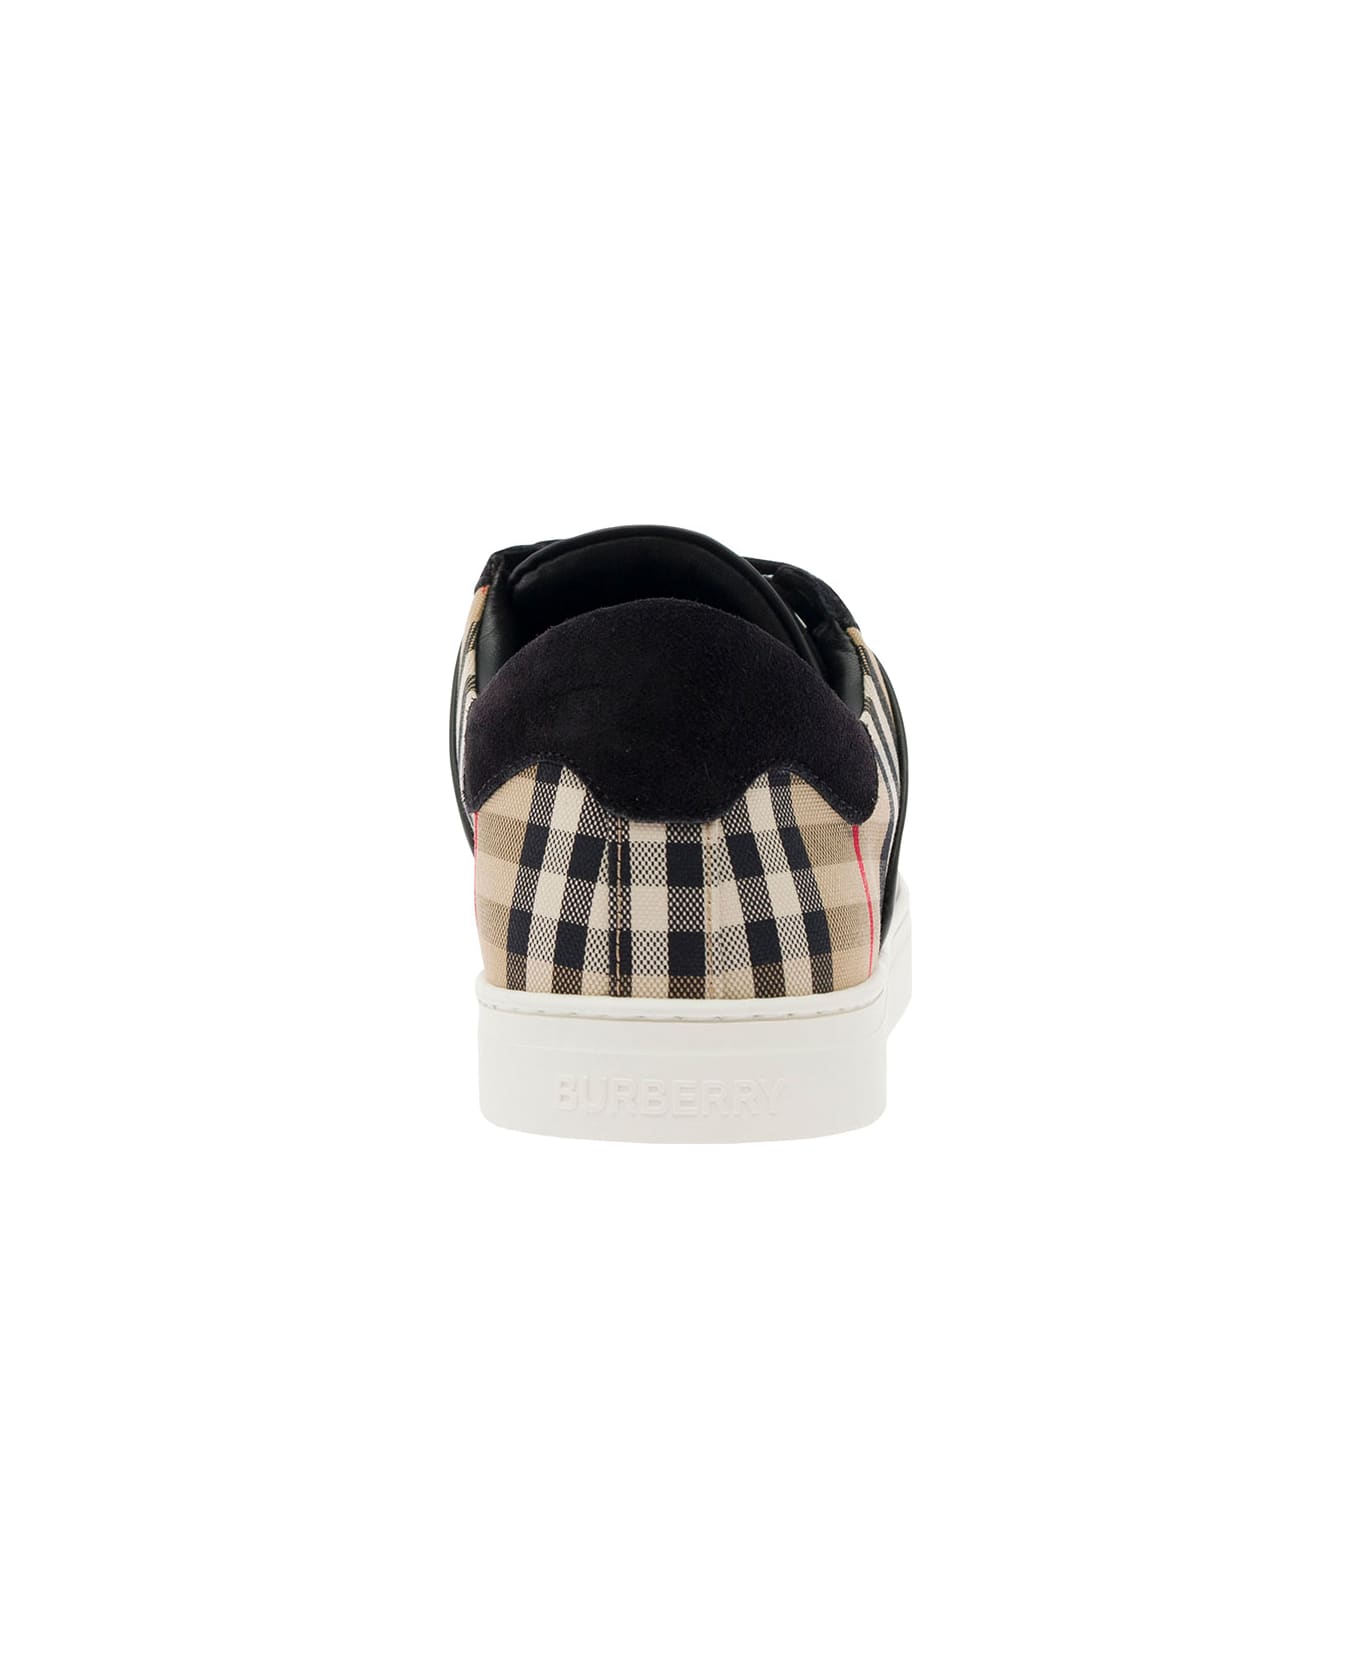 Burberry Black Sneakers With Suede Details And Check Motif In Leather Blend Man - Black